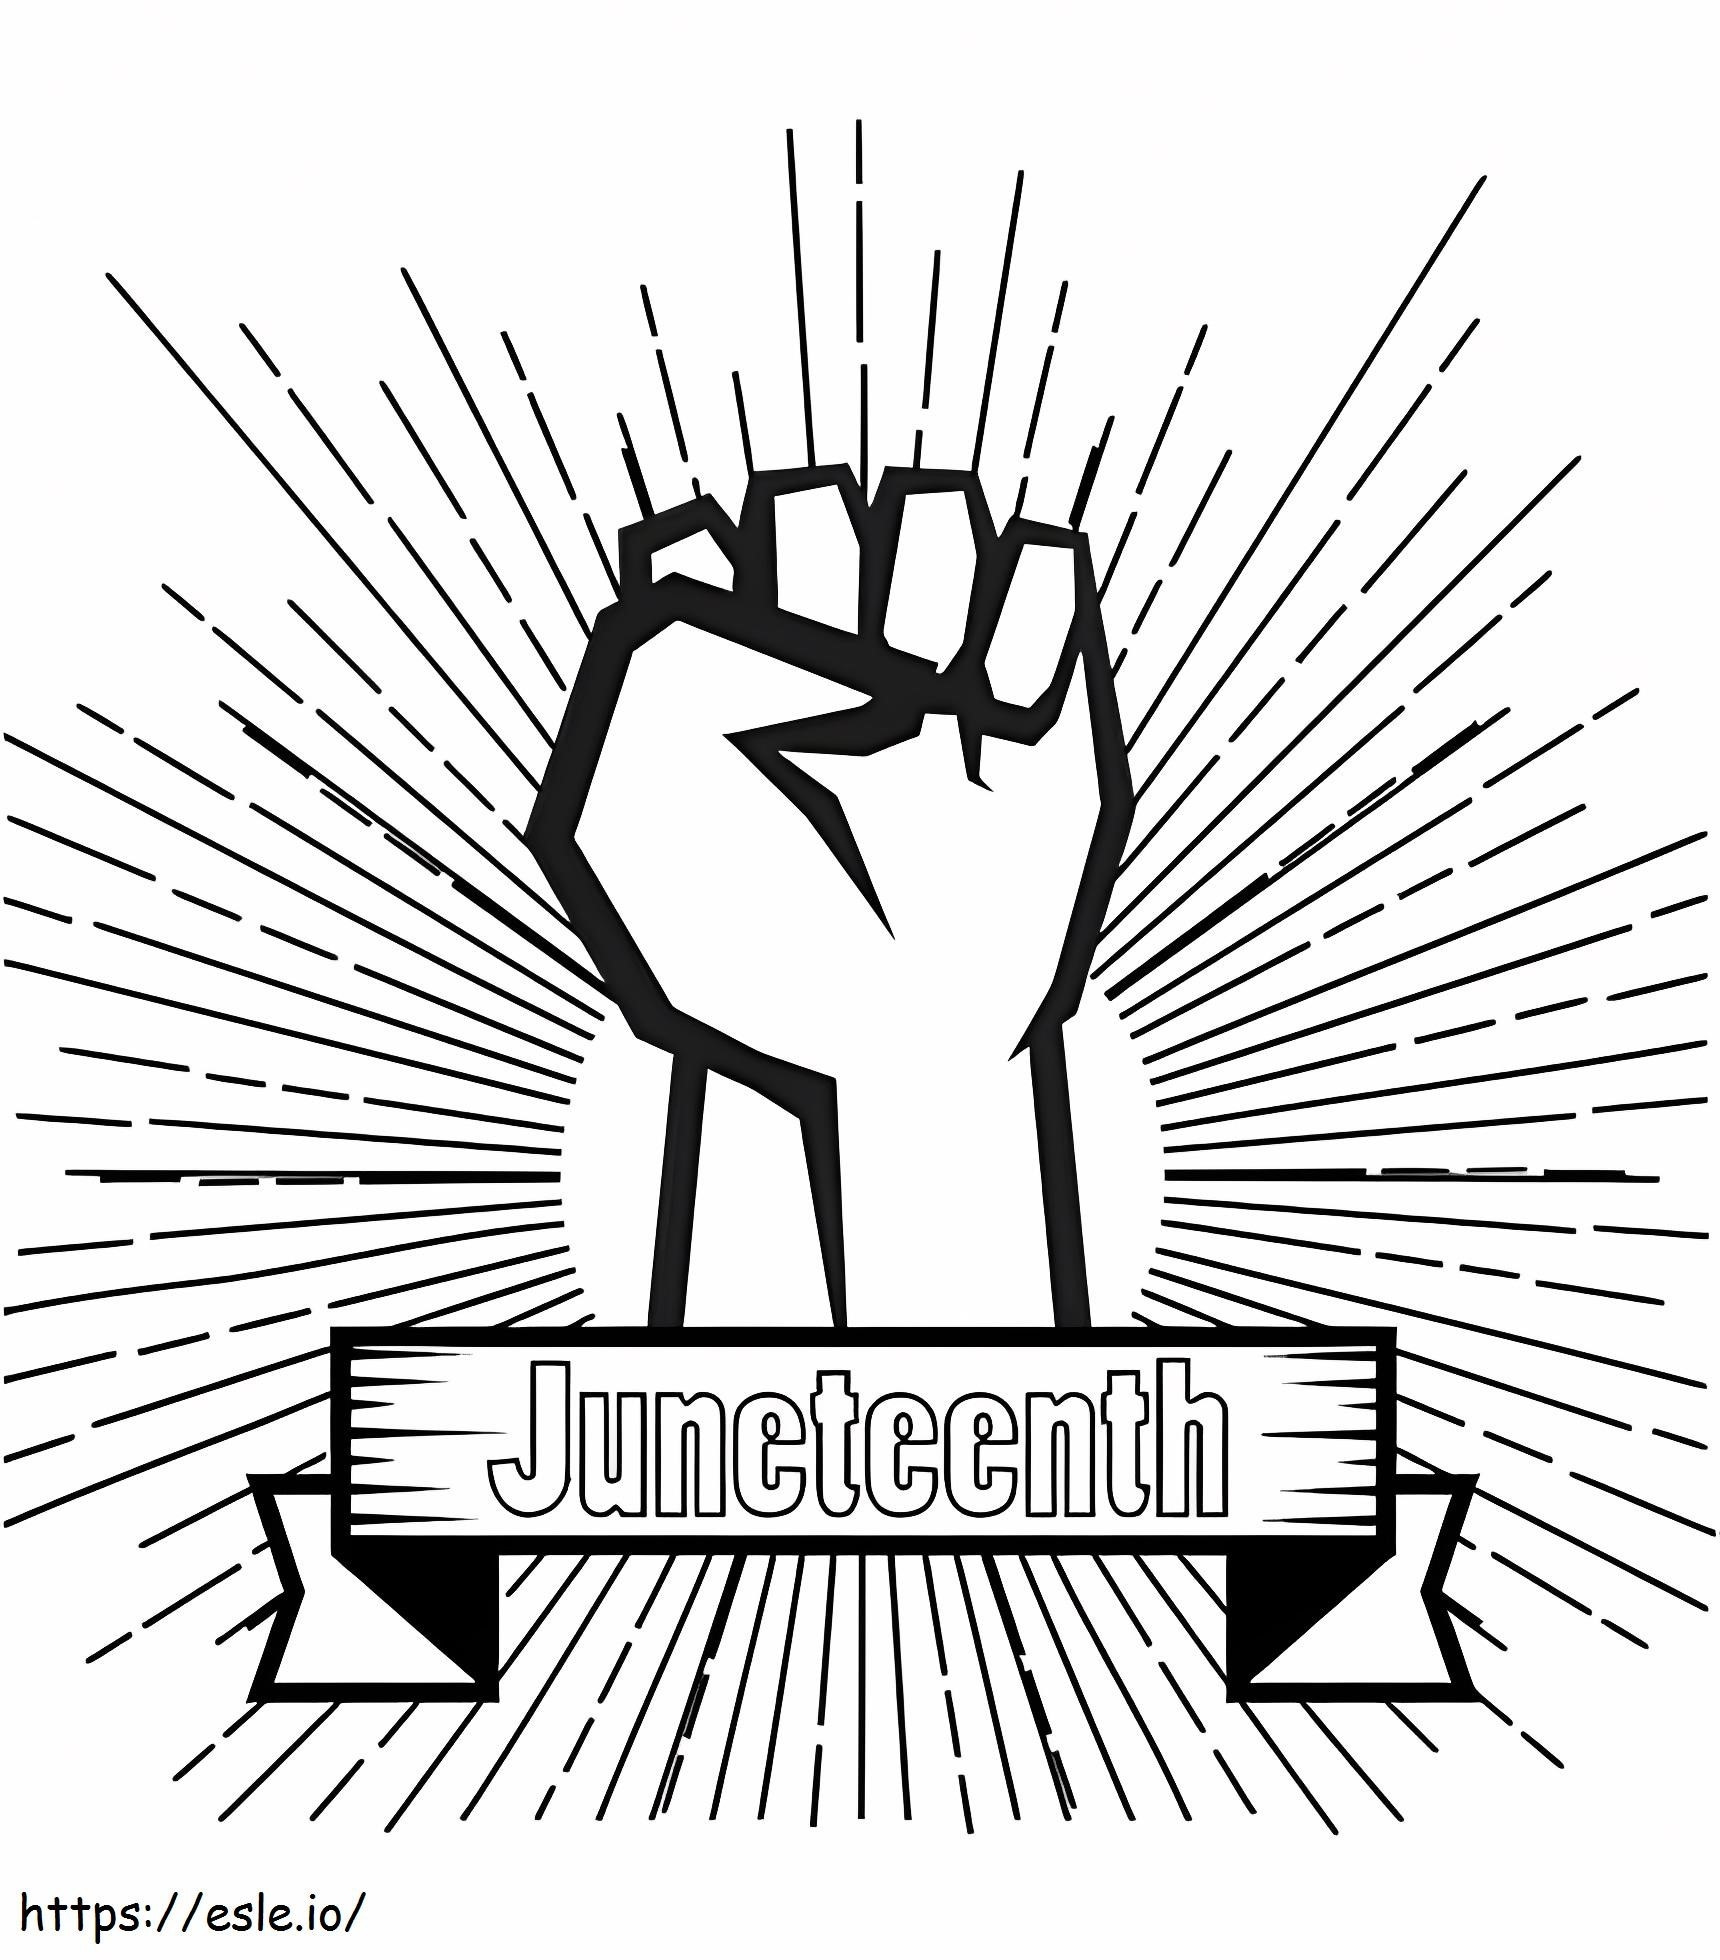 Juneteenth 2 coloring page